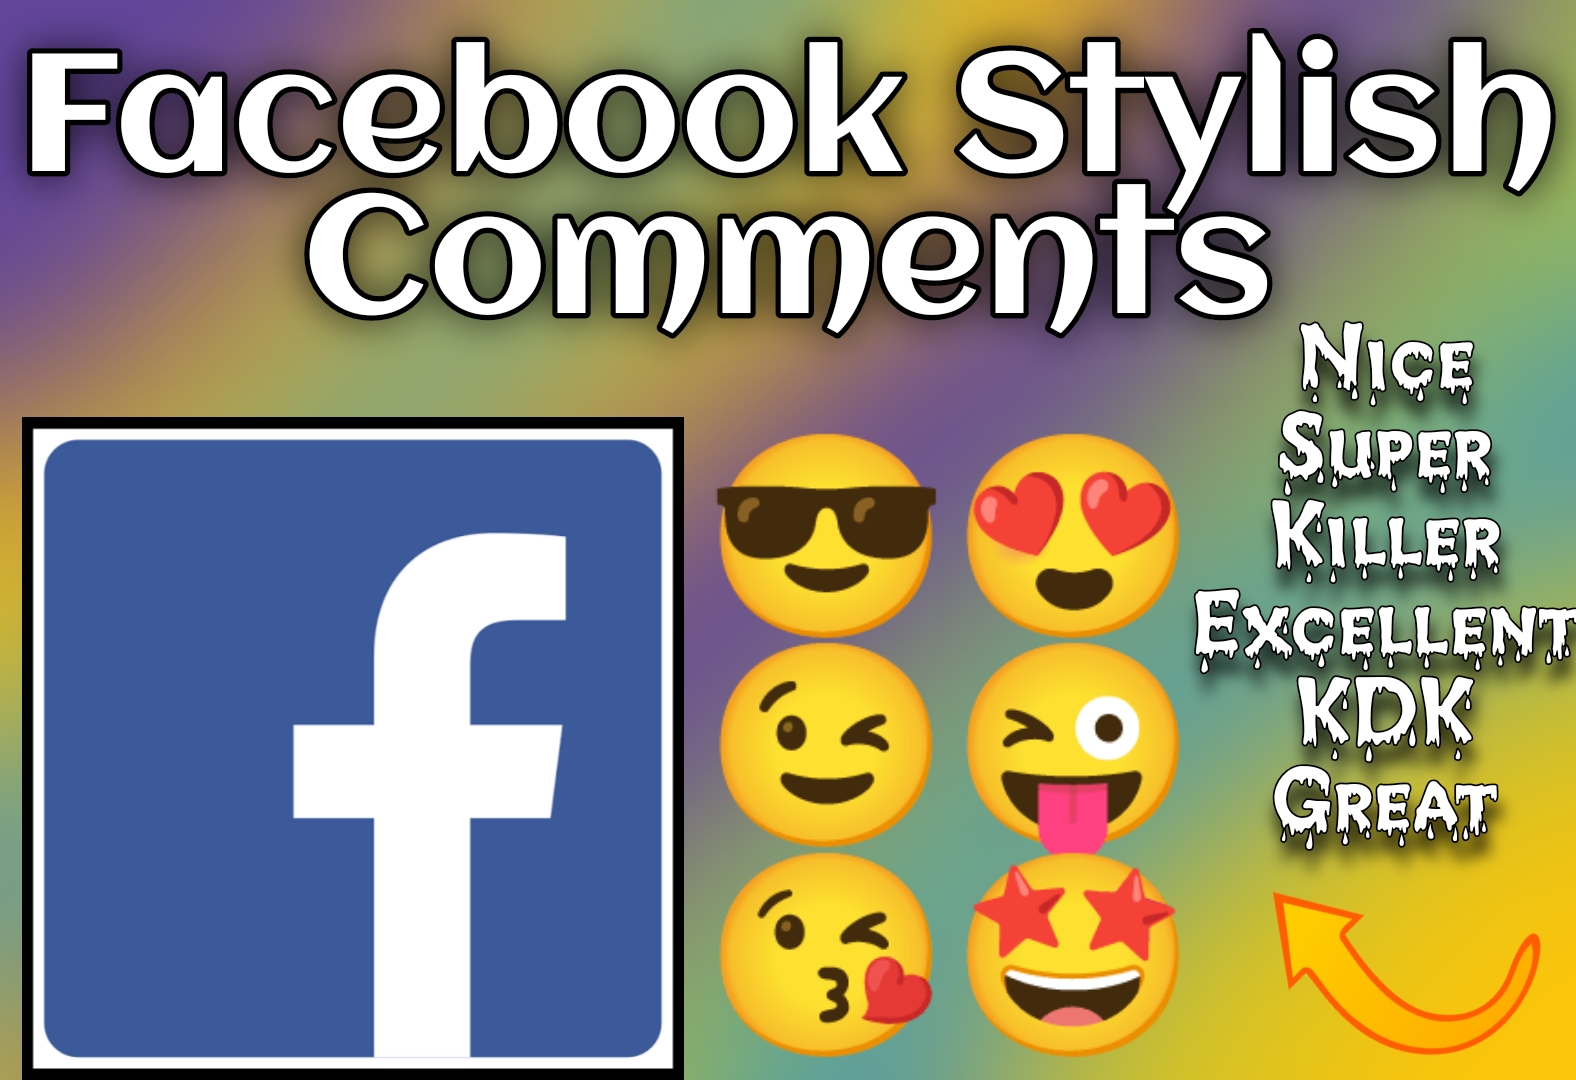 Stylish comments for fb